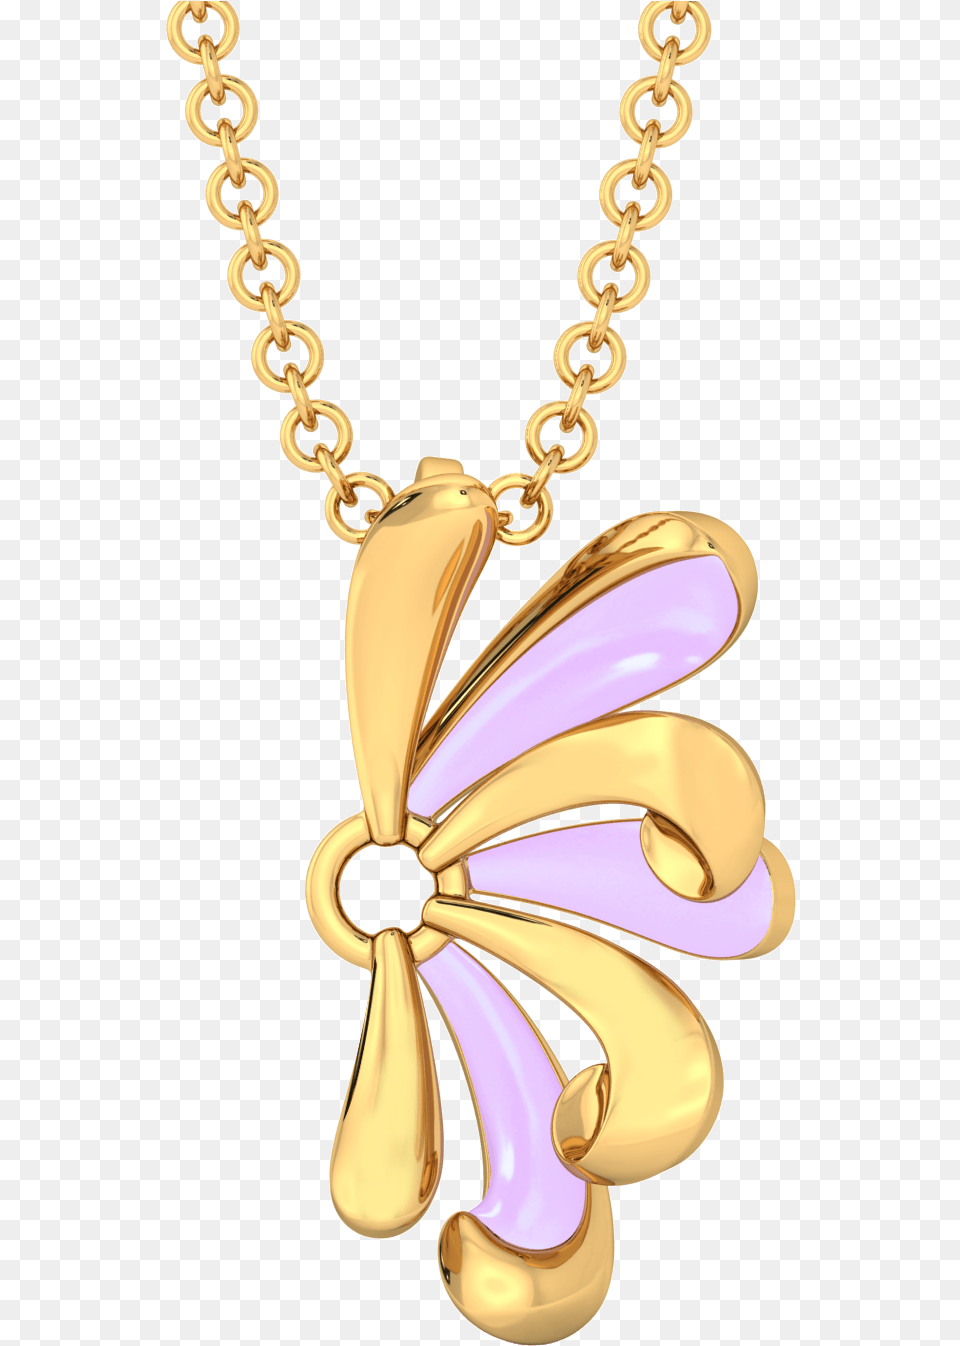 Pendant, Accessories, Jewelry, Necklace, Locket Free Transparent Png